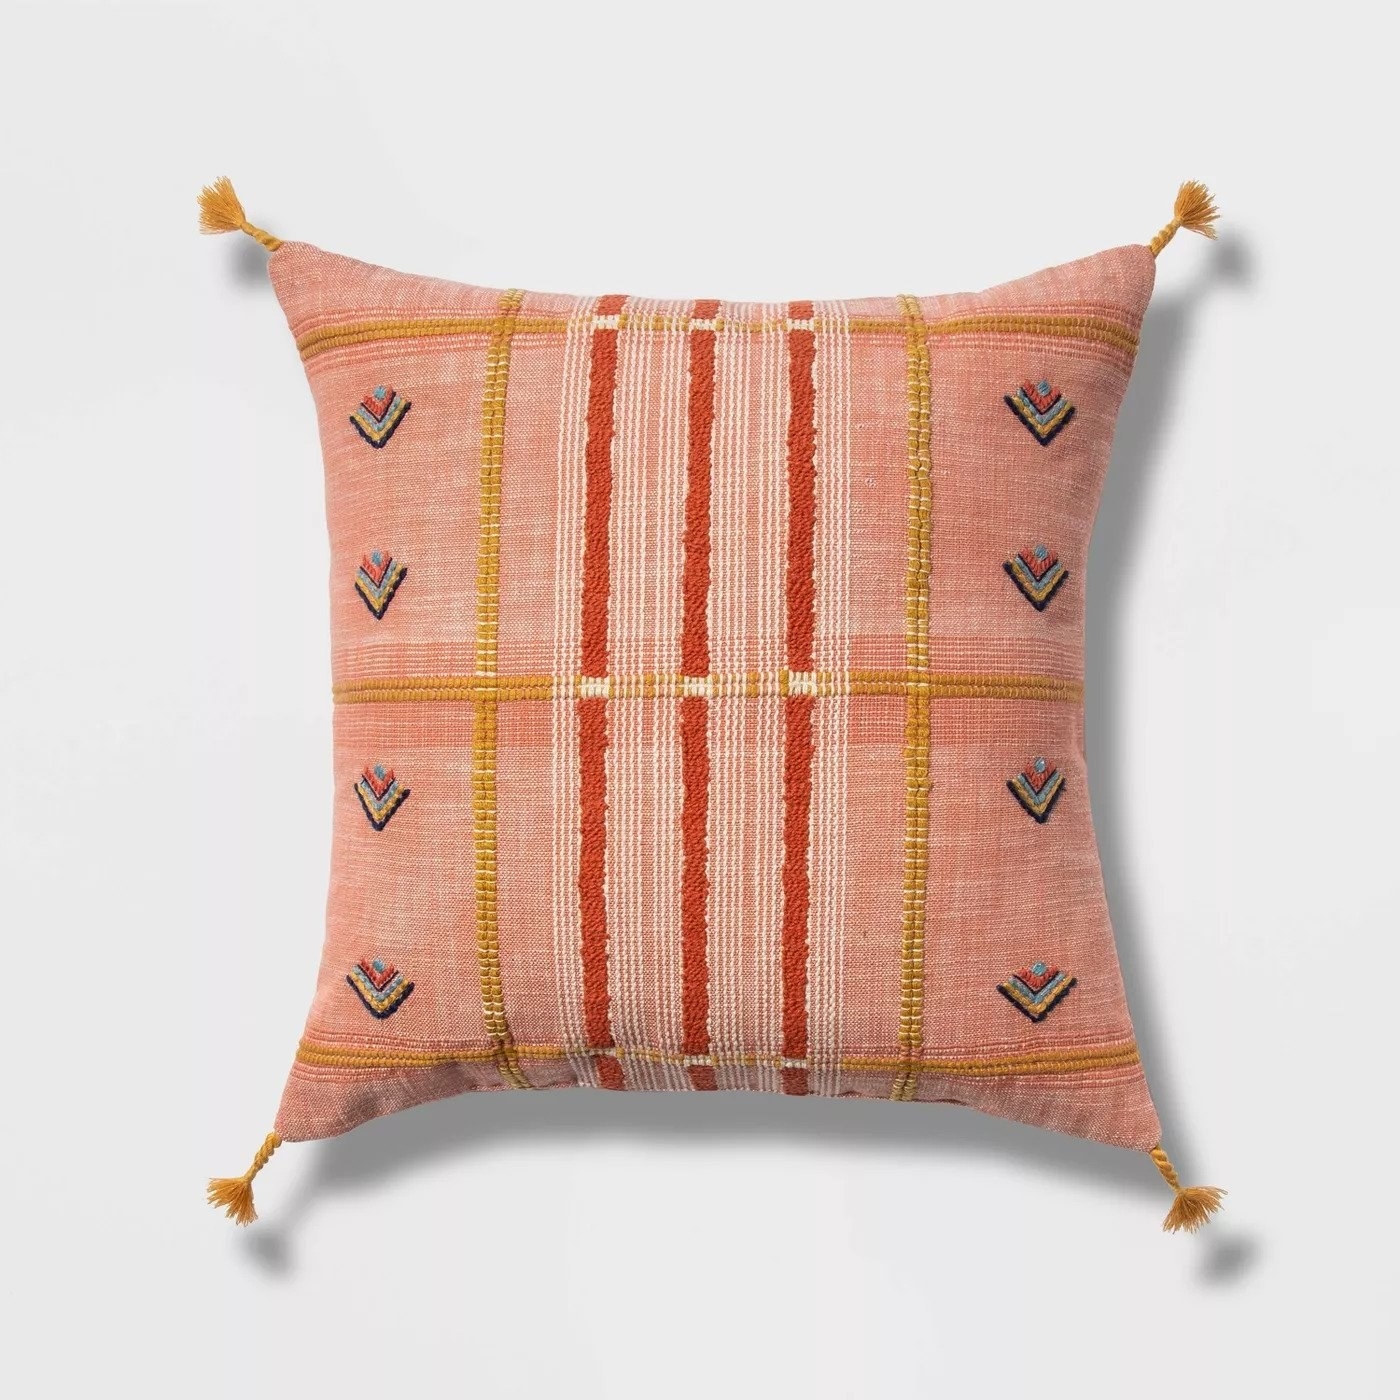 Square pillow with tassels on each corner and geometric patterns throughout